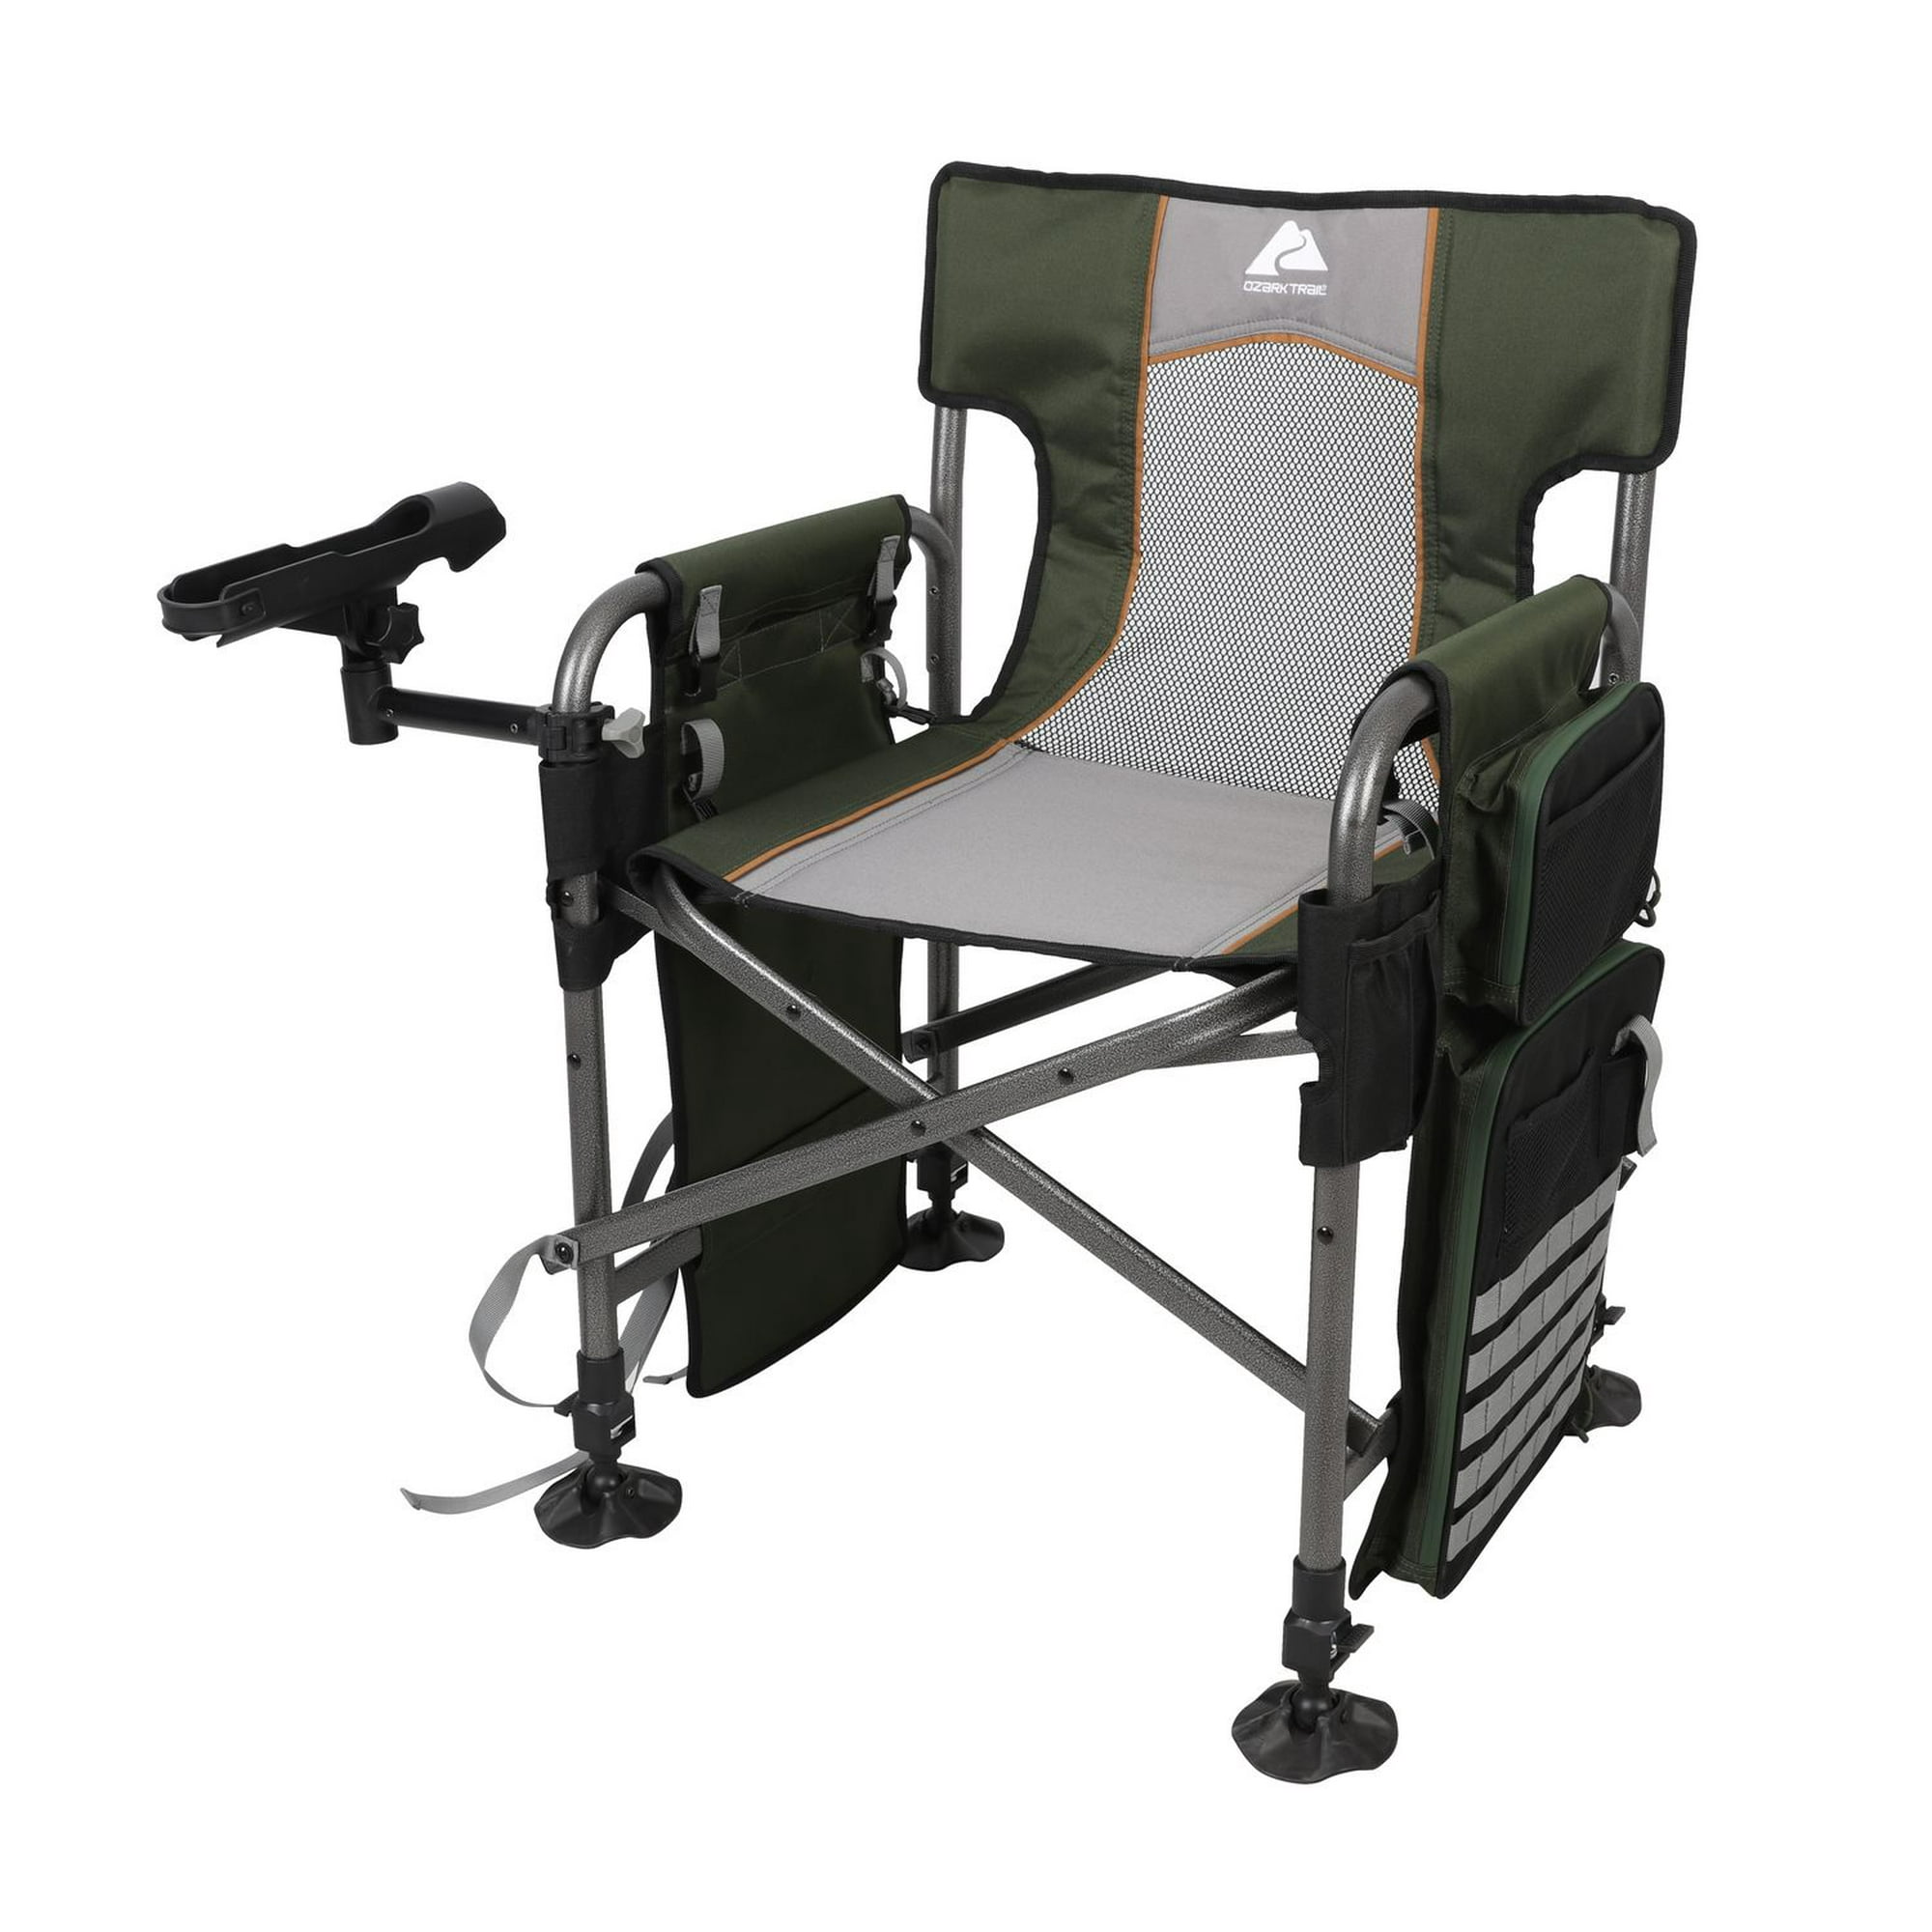 Reclining Fishing Chair, All Terrain Fishing Chair Fishing Chair Camping  Chair Heavy Duty with Adjustable Front and Rear Legs,Black Gray,Set 2